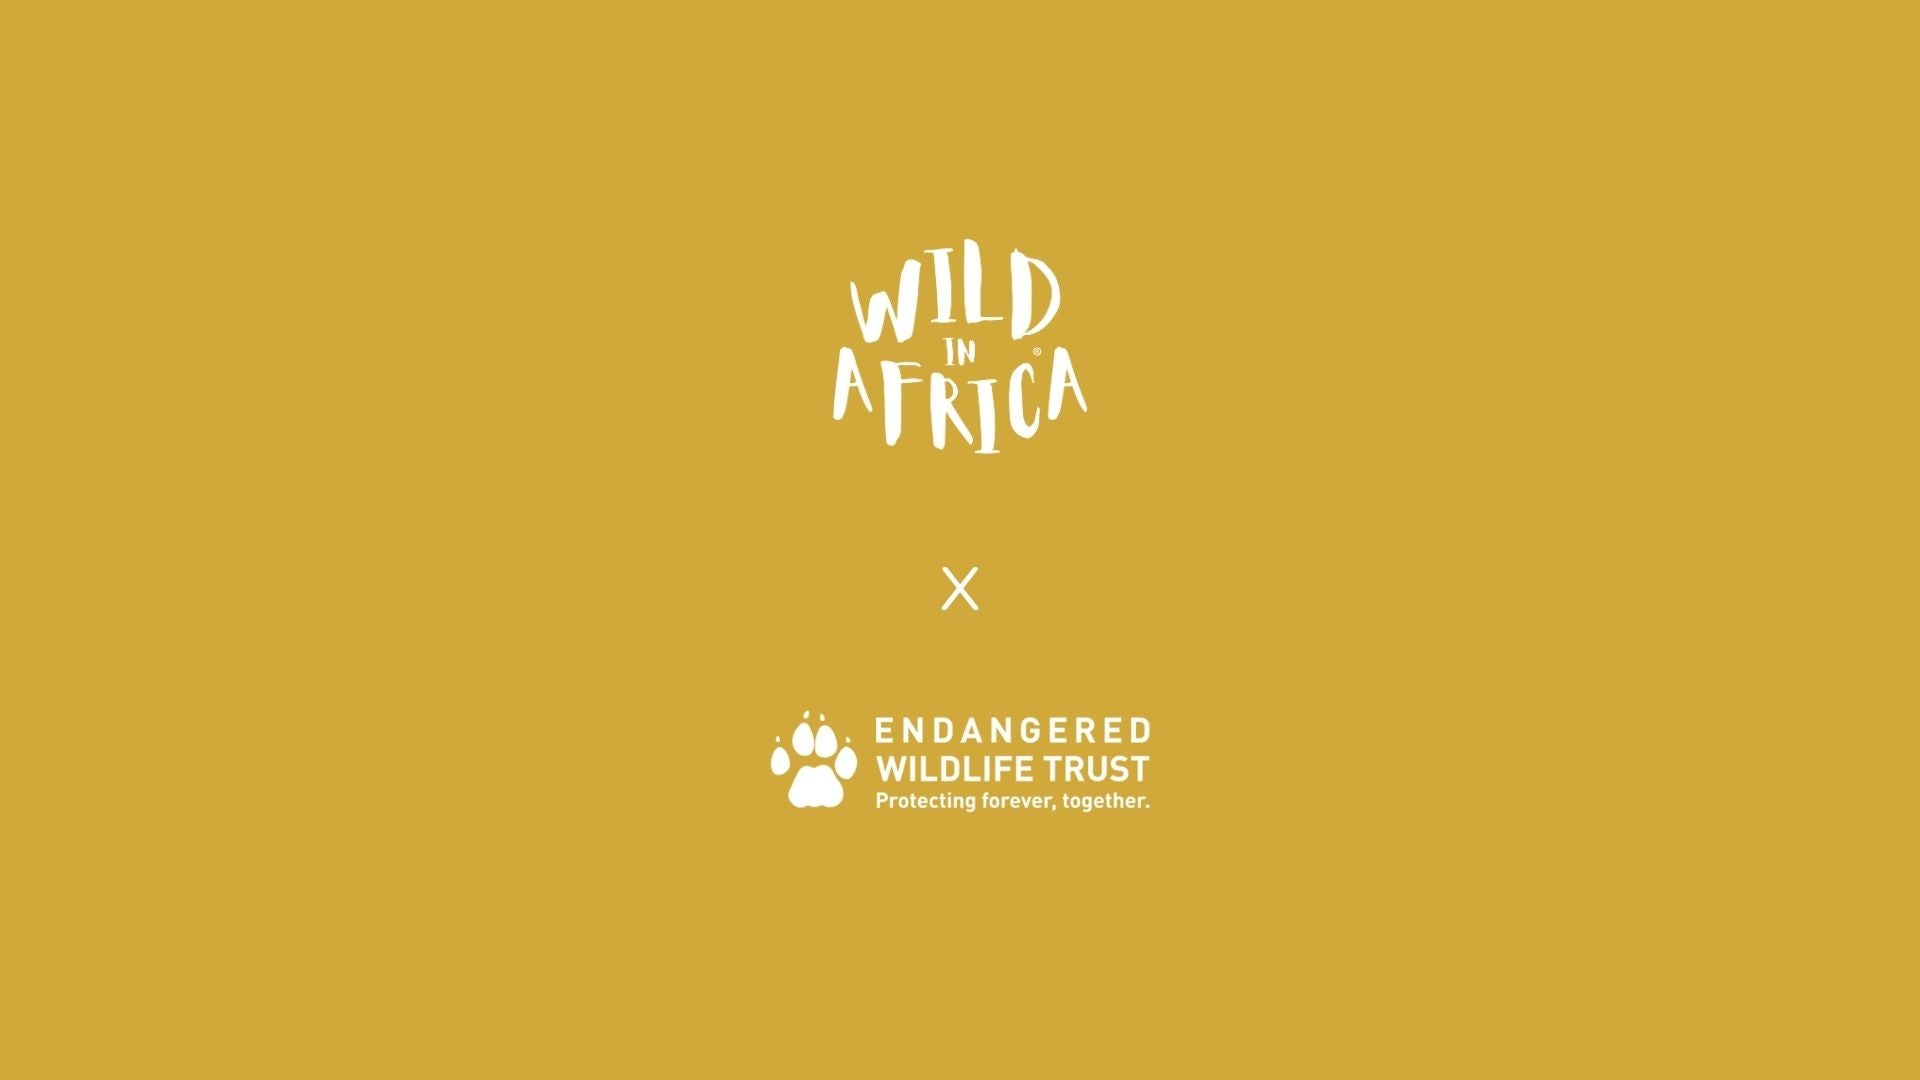 Introducing Our Exciting Collaboration with the Endangered Wildlife Trust: Making a Meaningful Impact Together